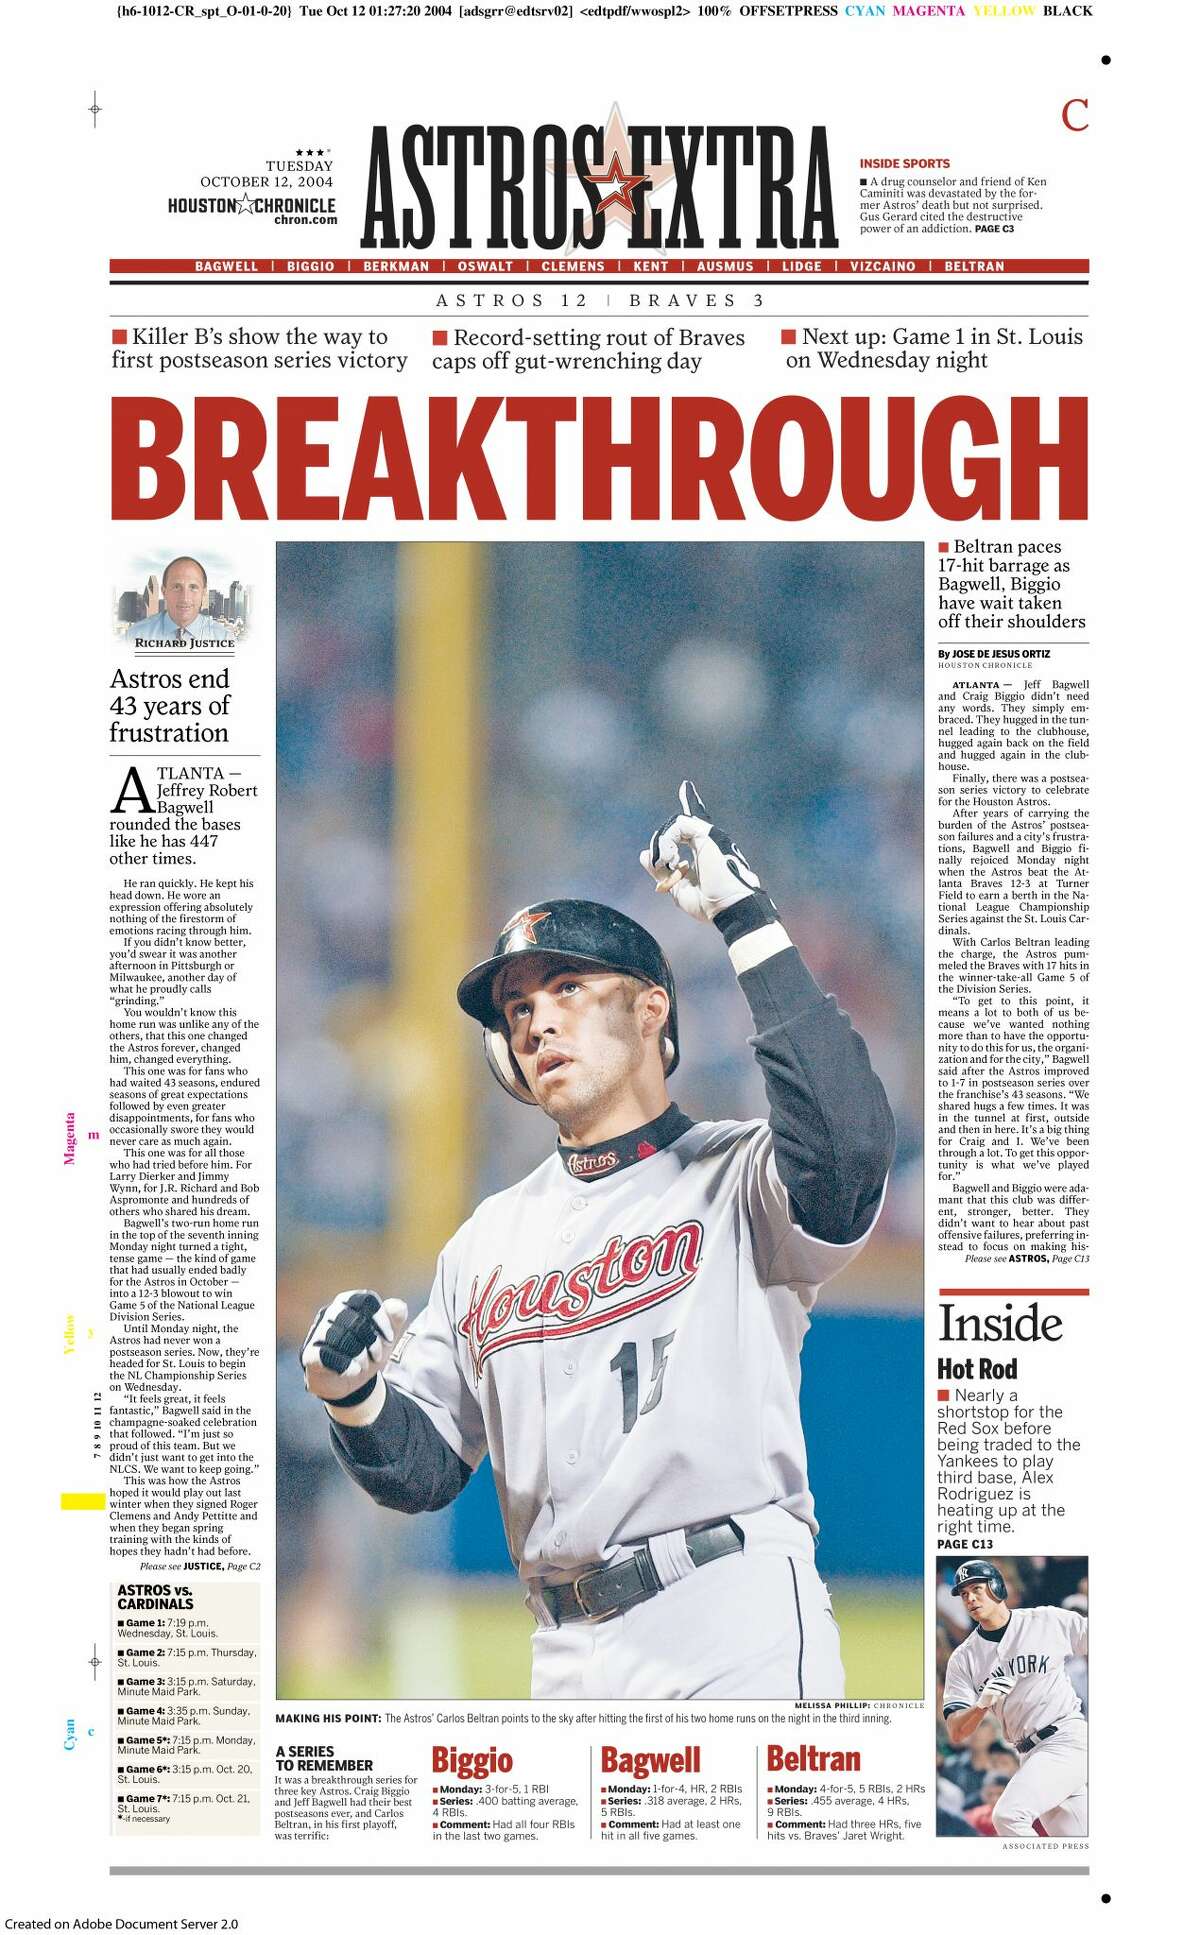 The Houston Chronicle's Oct. 12, 2004, sports section front page after the Astros' Game 5 win over the Braves in the NLDS.